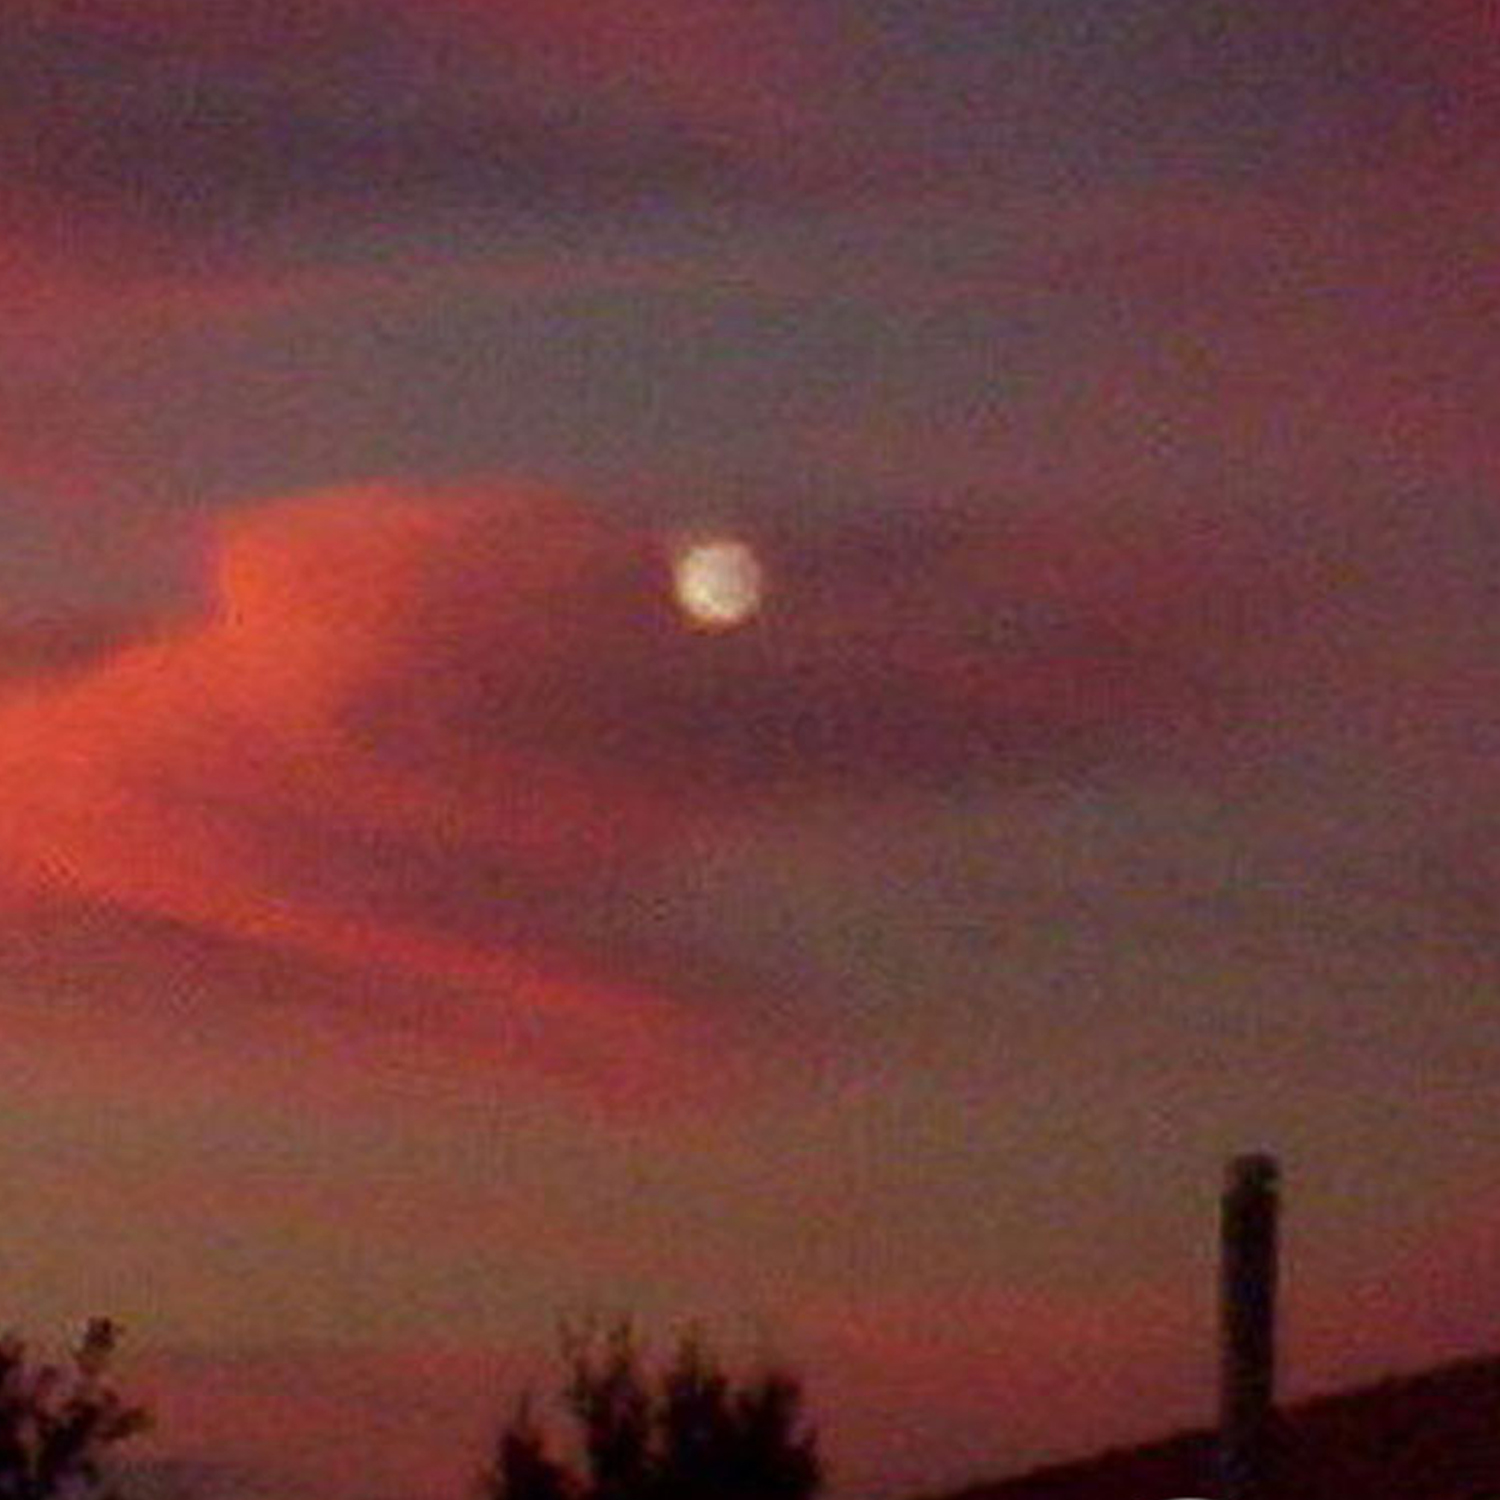 UFO picture shot on dusk at Waroona in the Peel region of Australia UFO Picture #145-3